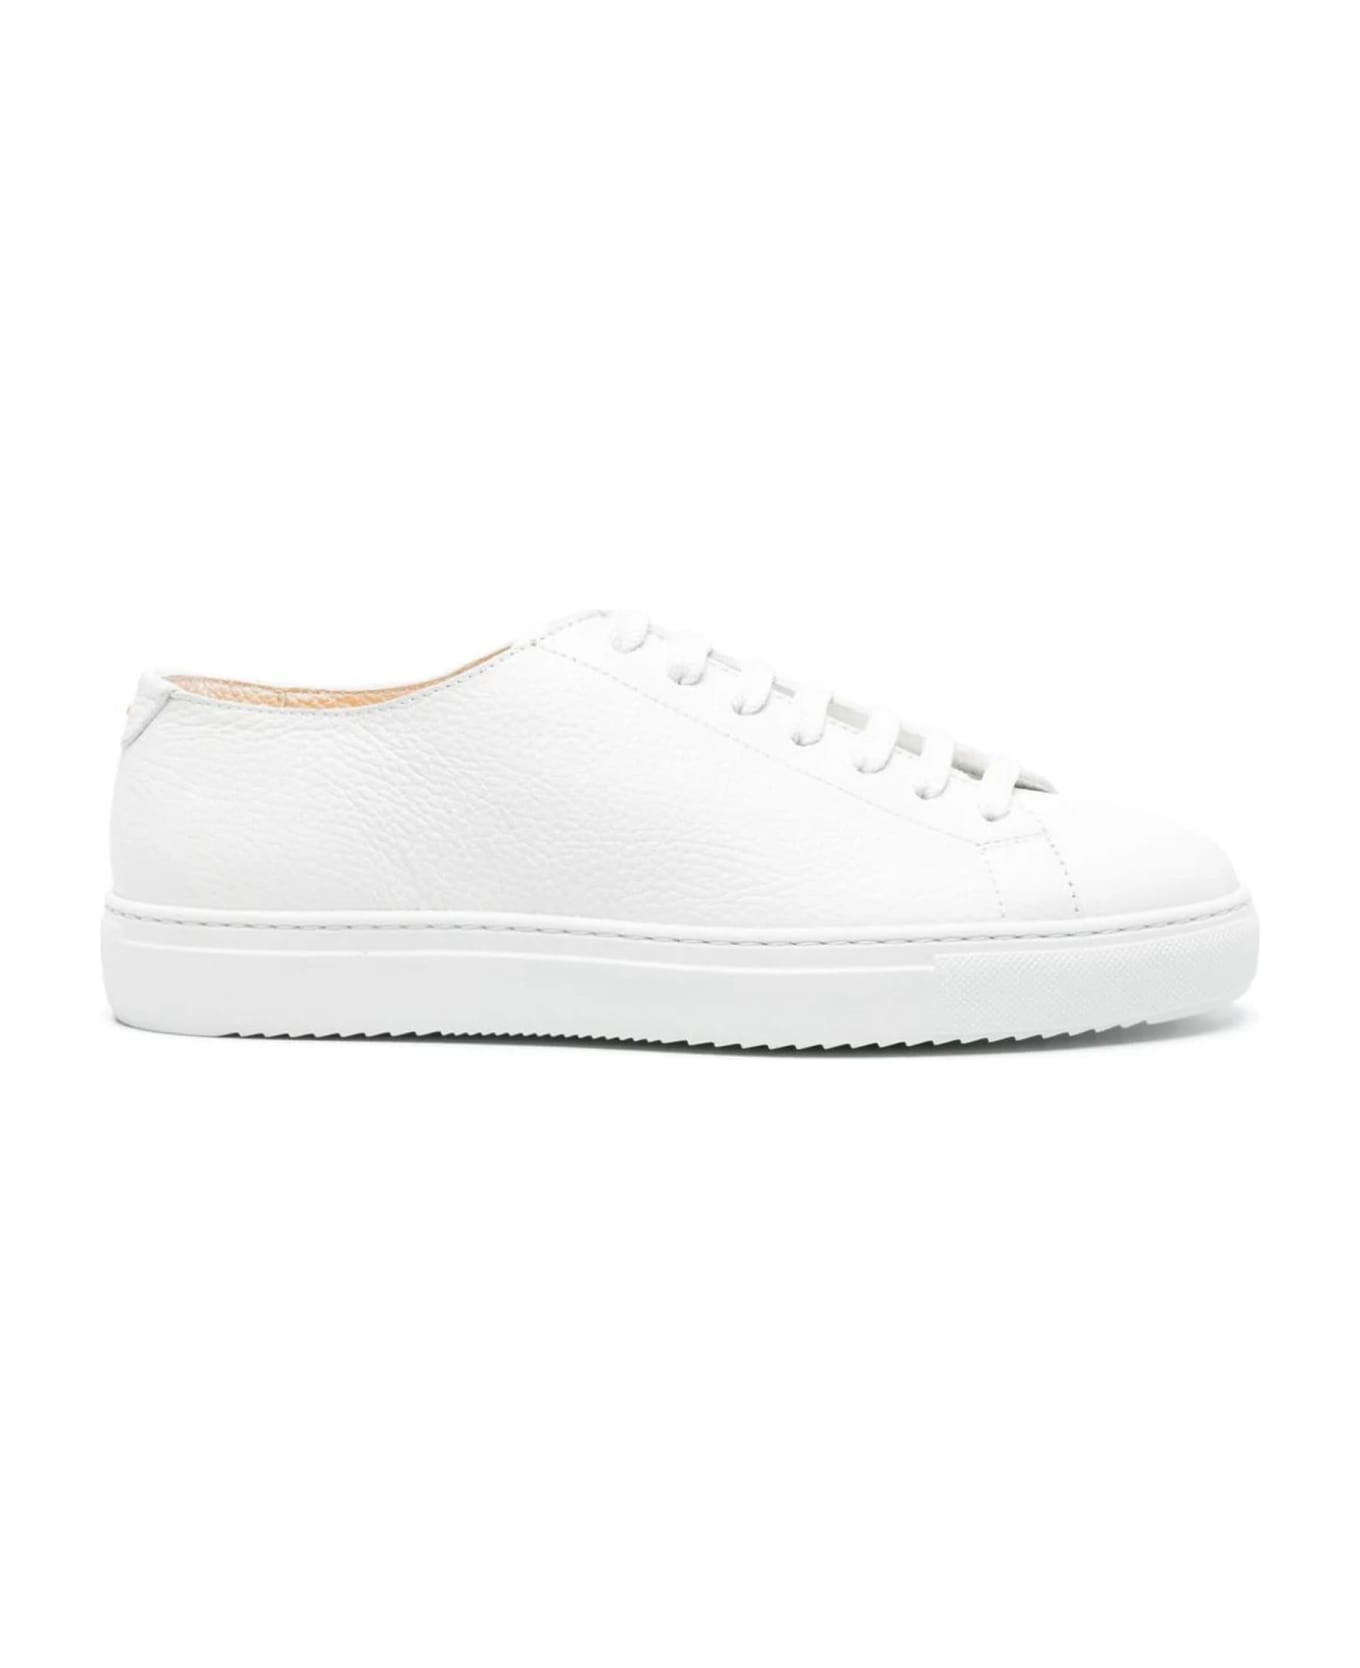 Doucal's White Calf Leather Sneakers - Bianco